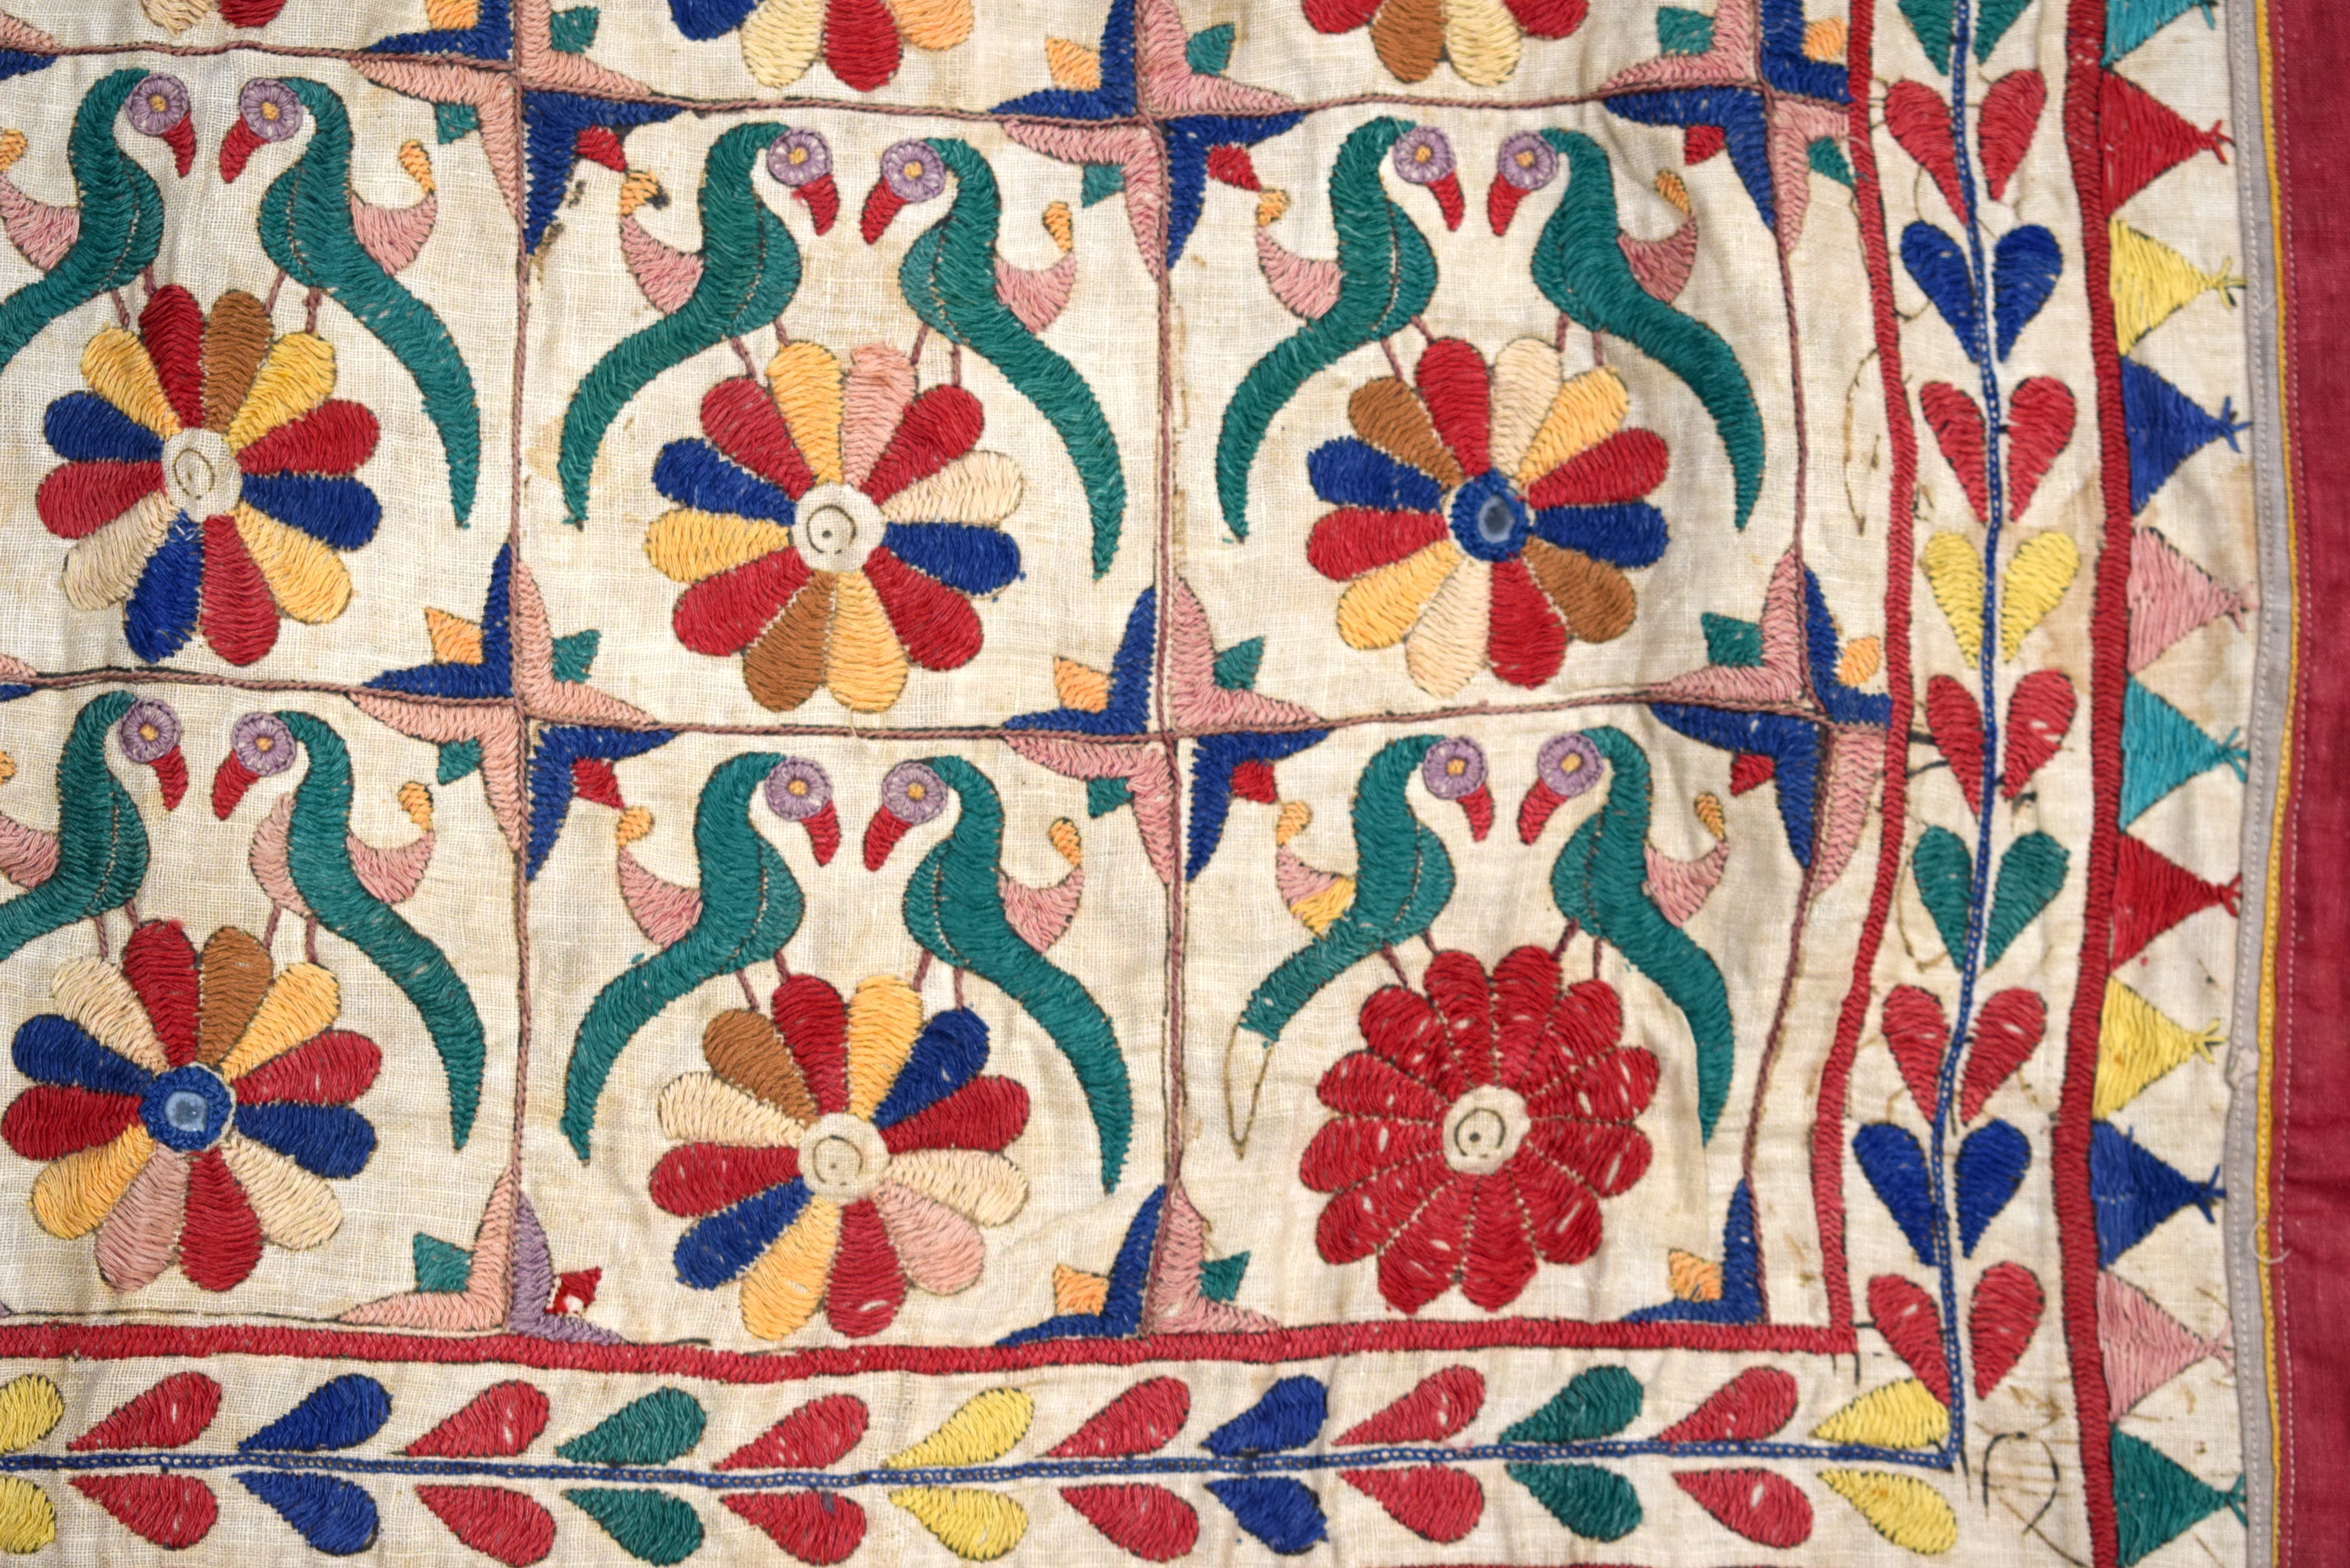 A MIDDLE EASTERN INDIAN EMBROIDERED TEXTILE. 98 cm x 96 cm. - Image 2 of 4